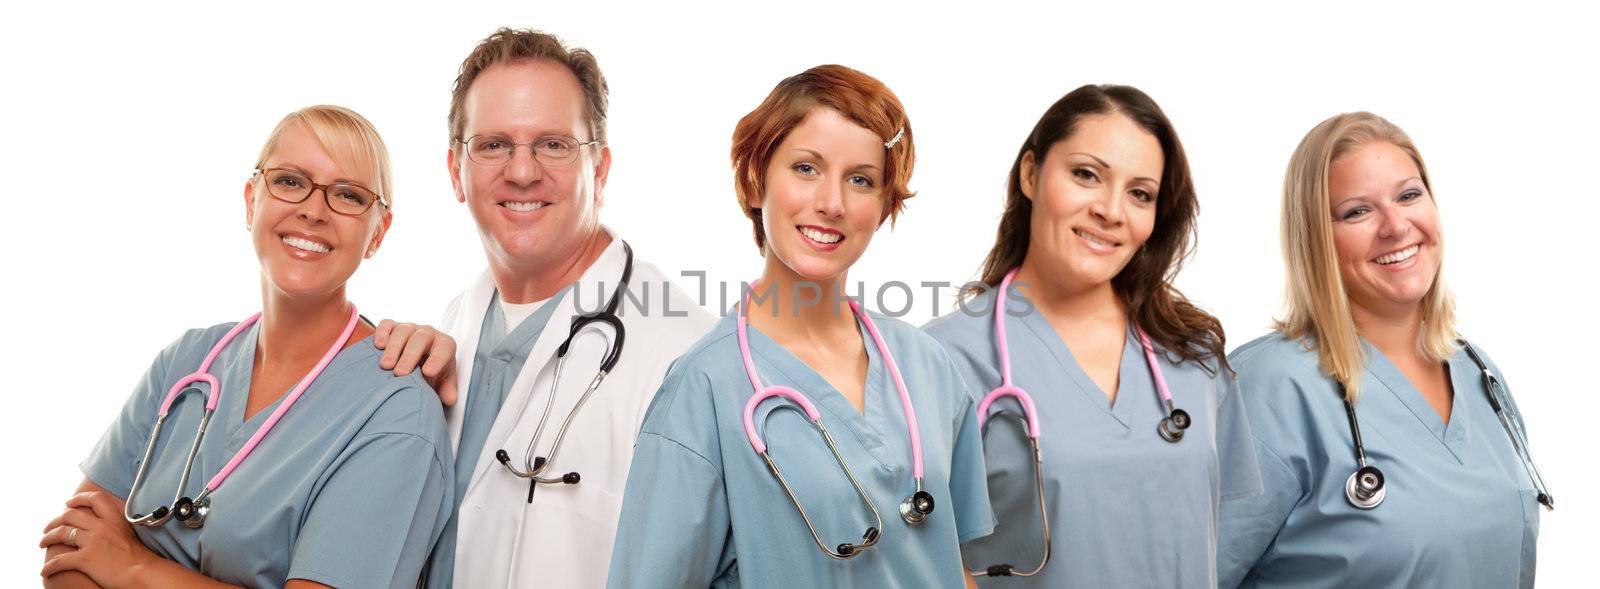 Group of Smiling Male and Female Doctors or Nurses Isolated on a White Background.